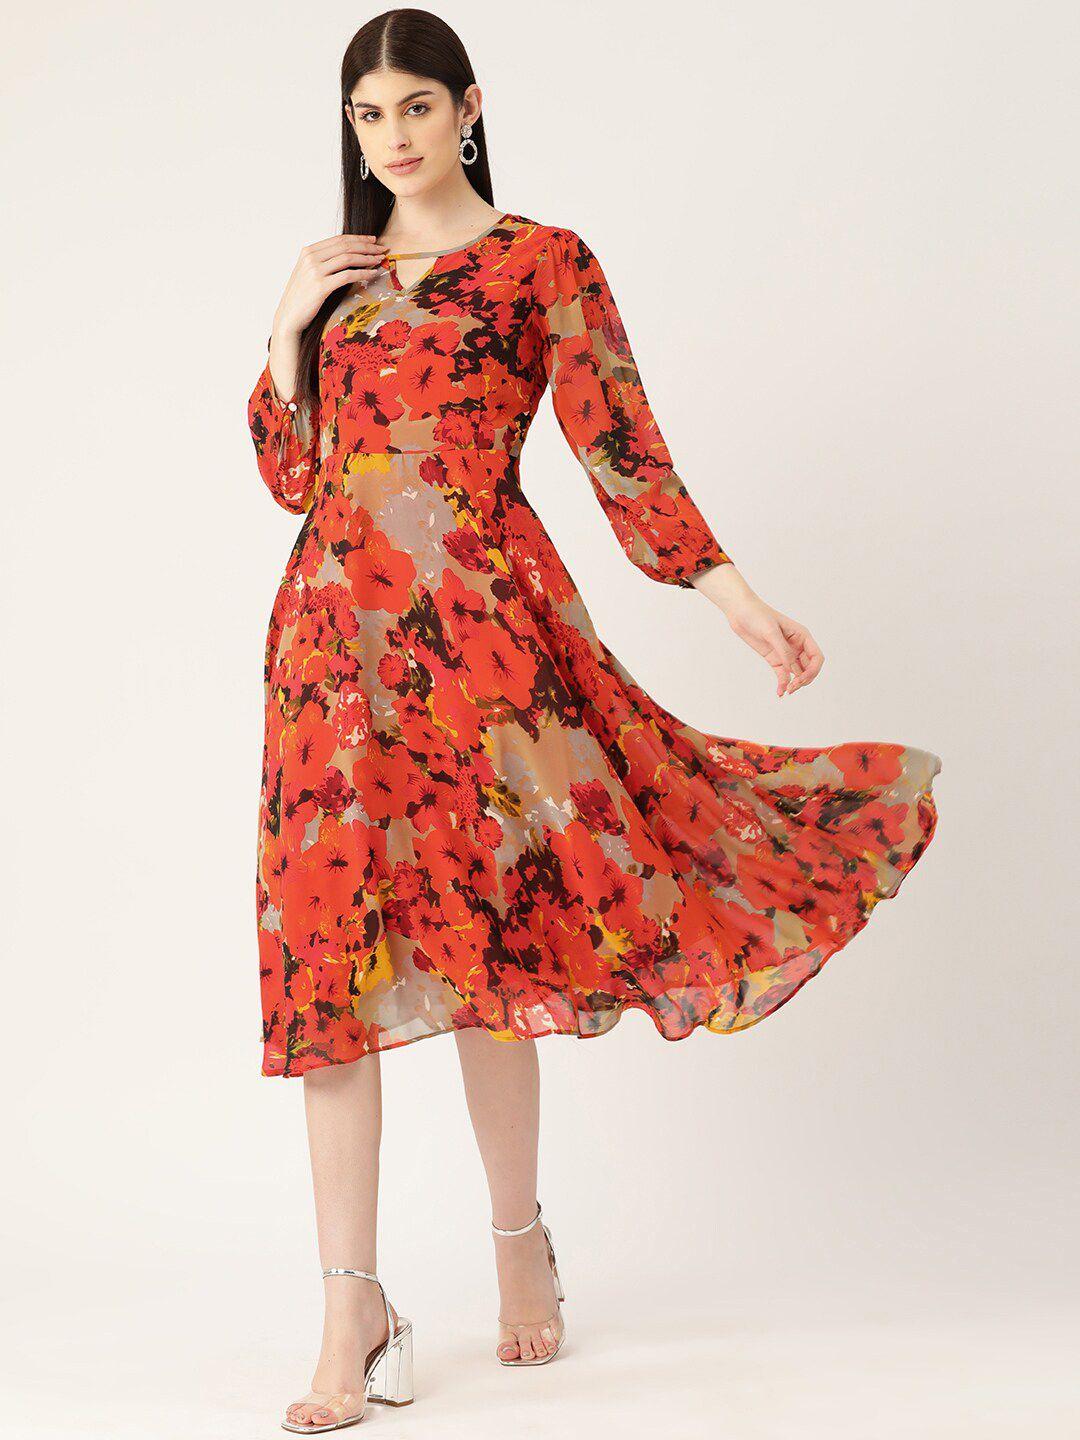 dressberry mustard yellow & red floral printed georgette fit & flare midi dress